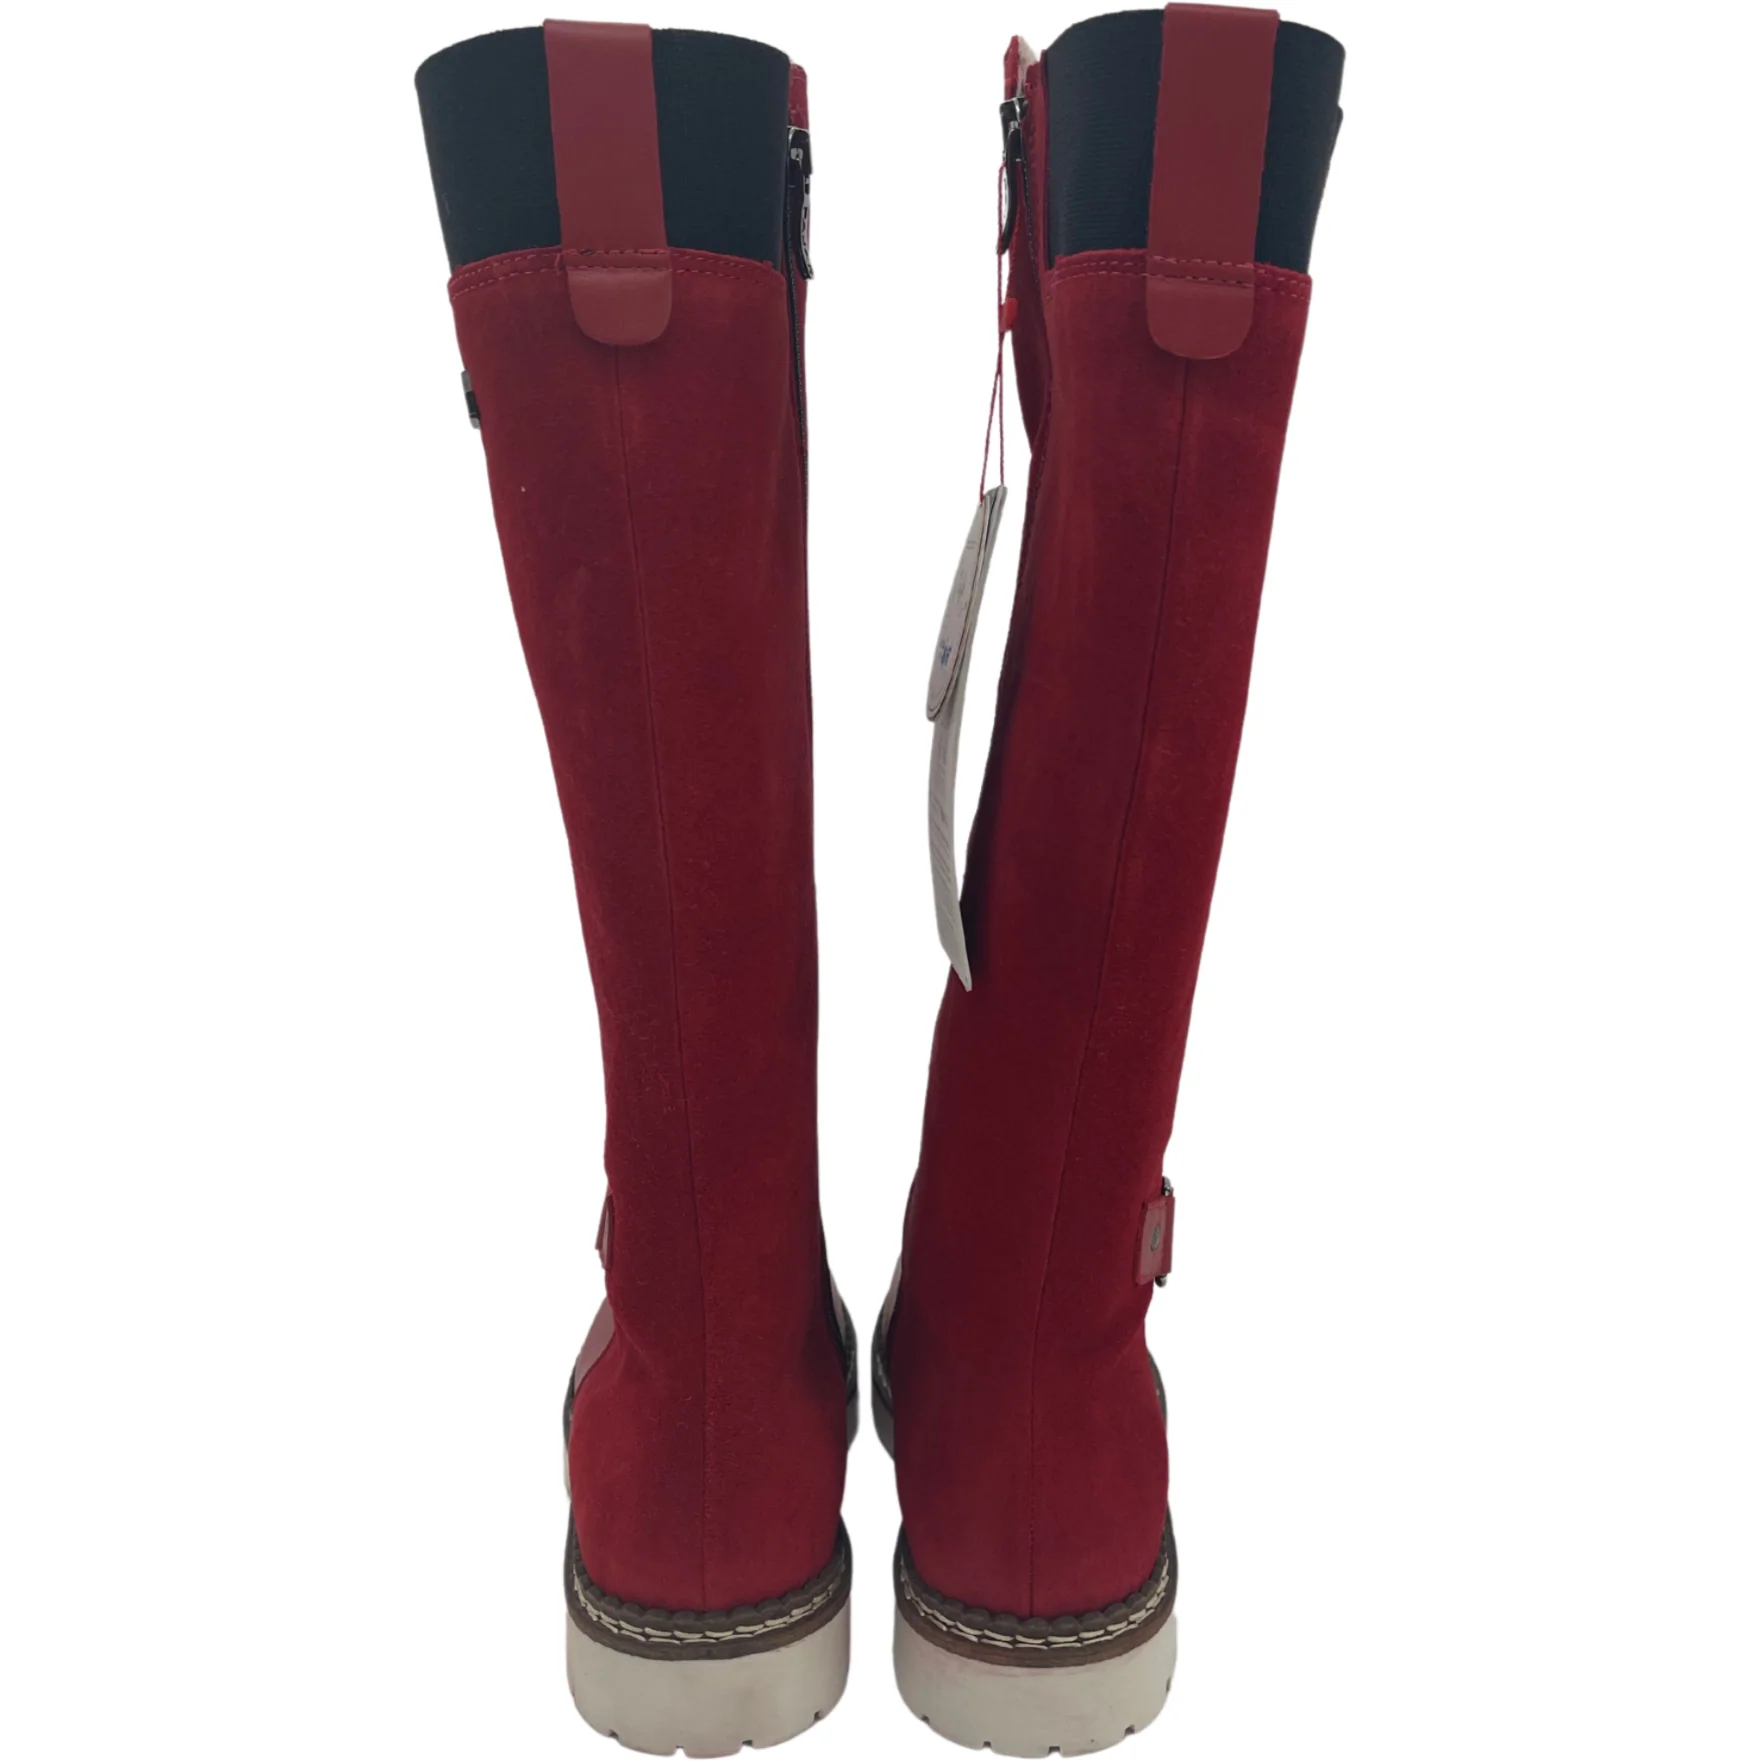 Pajar Women's Winter Boots / Tall Boots / Bright Red / Size US 10 **LIKE NEW**